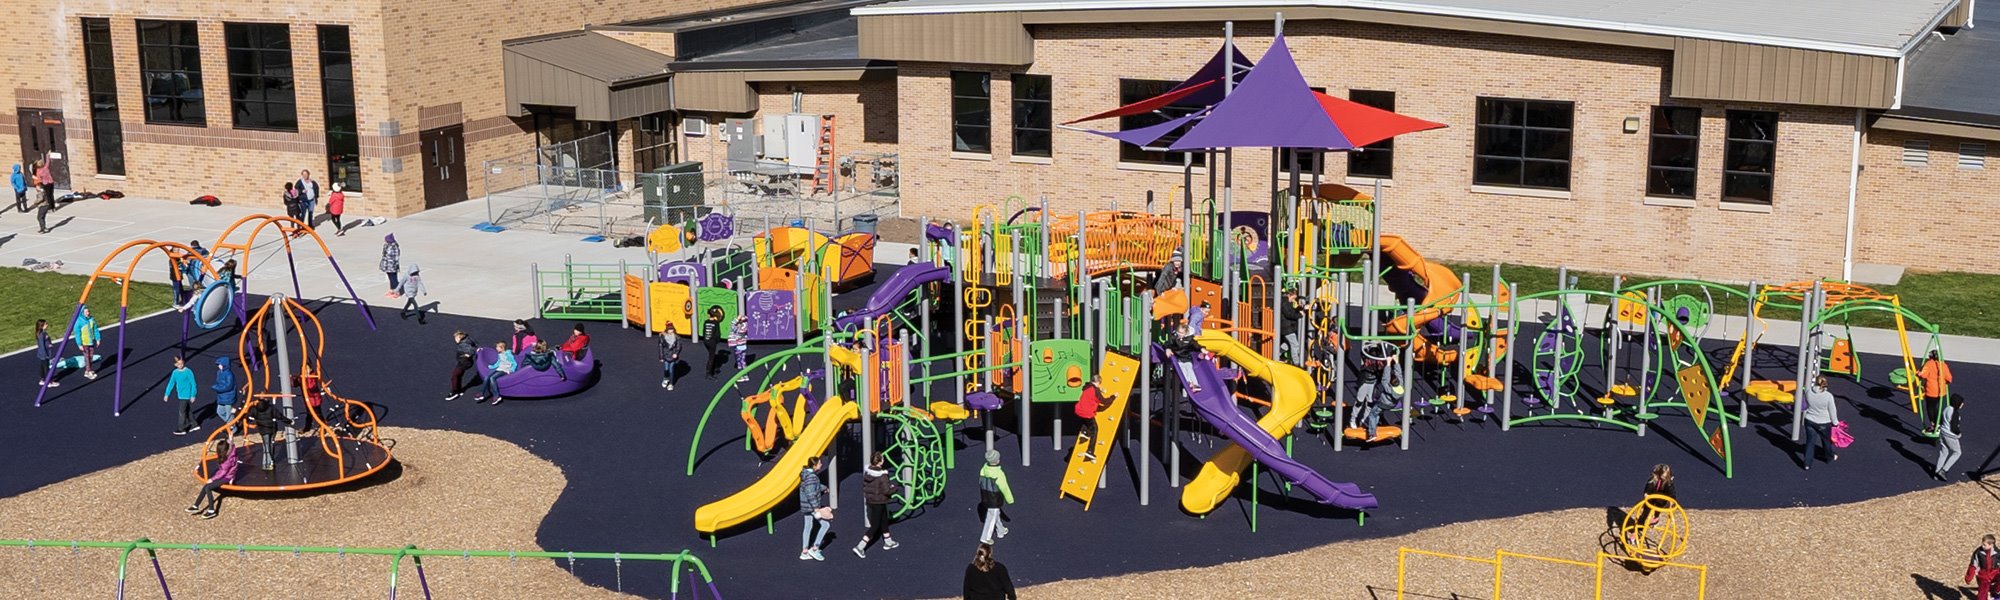 Fitness Playgrounds